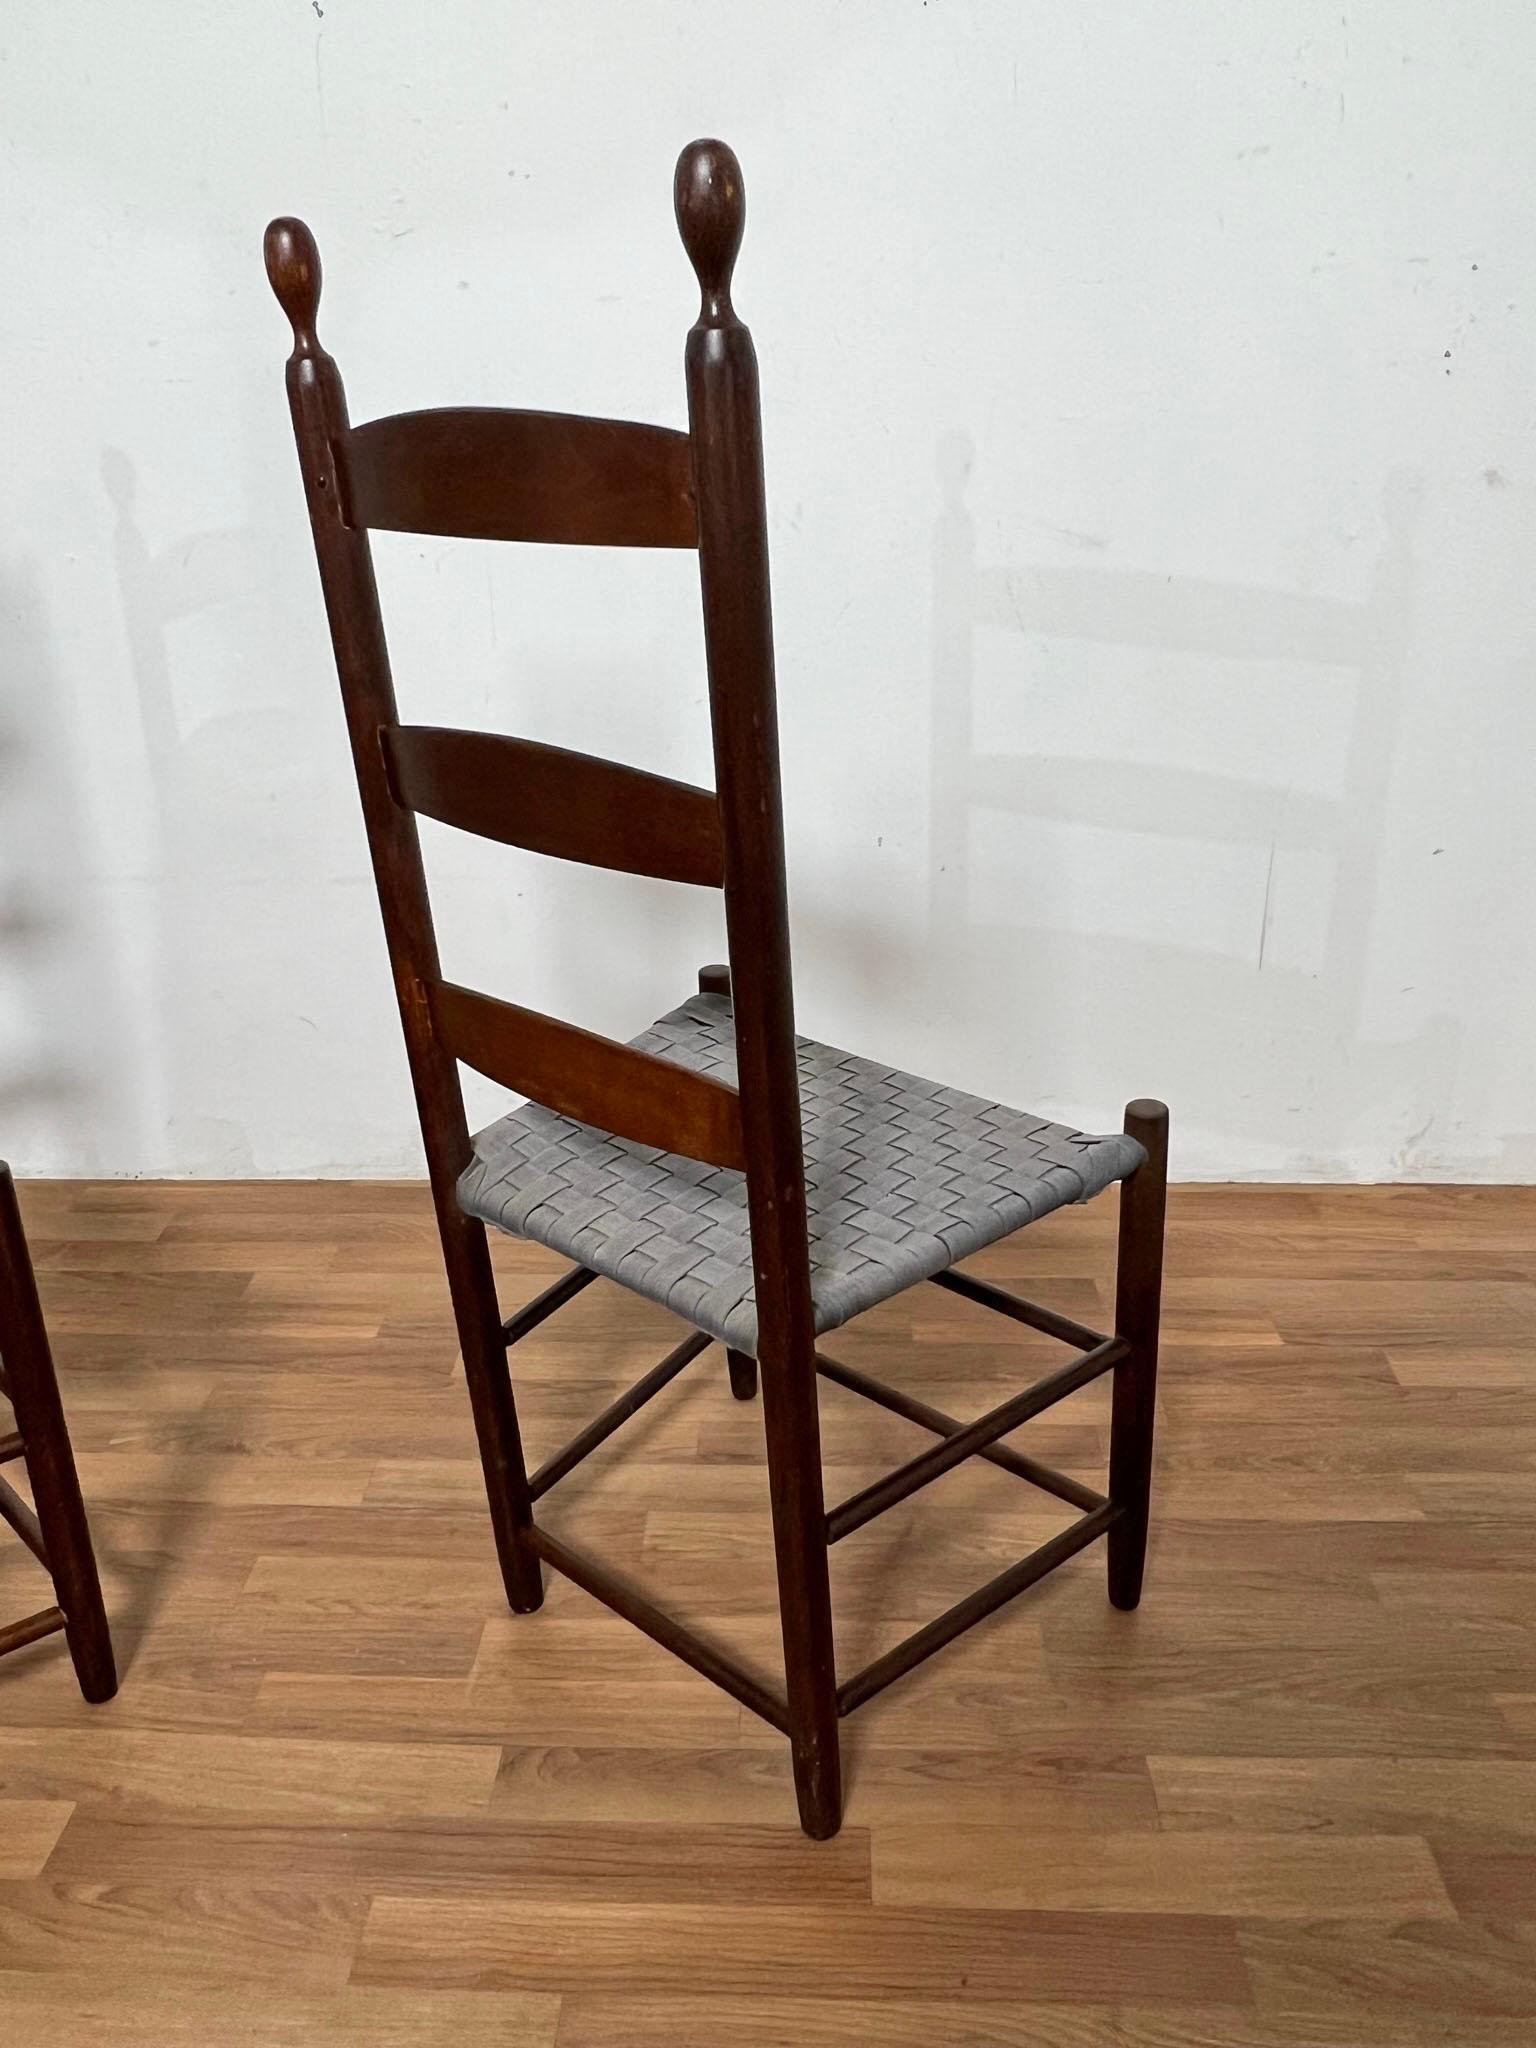 Pair of Original Shaker Chairs from the Enfield Community, circa Mid 1800s 1